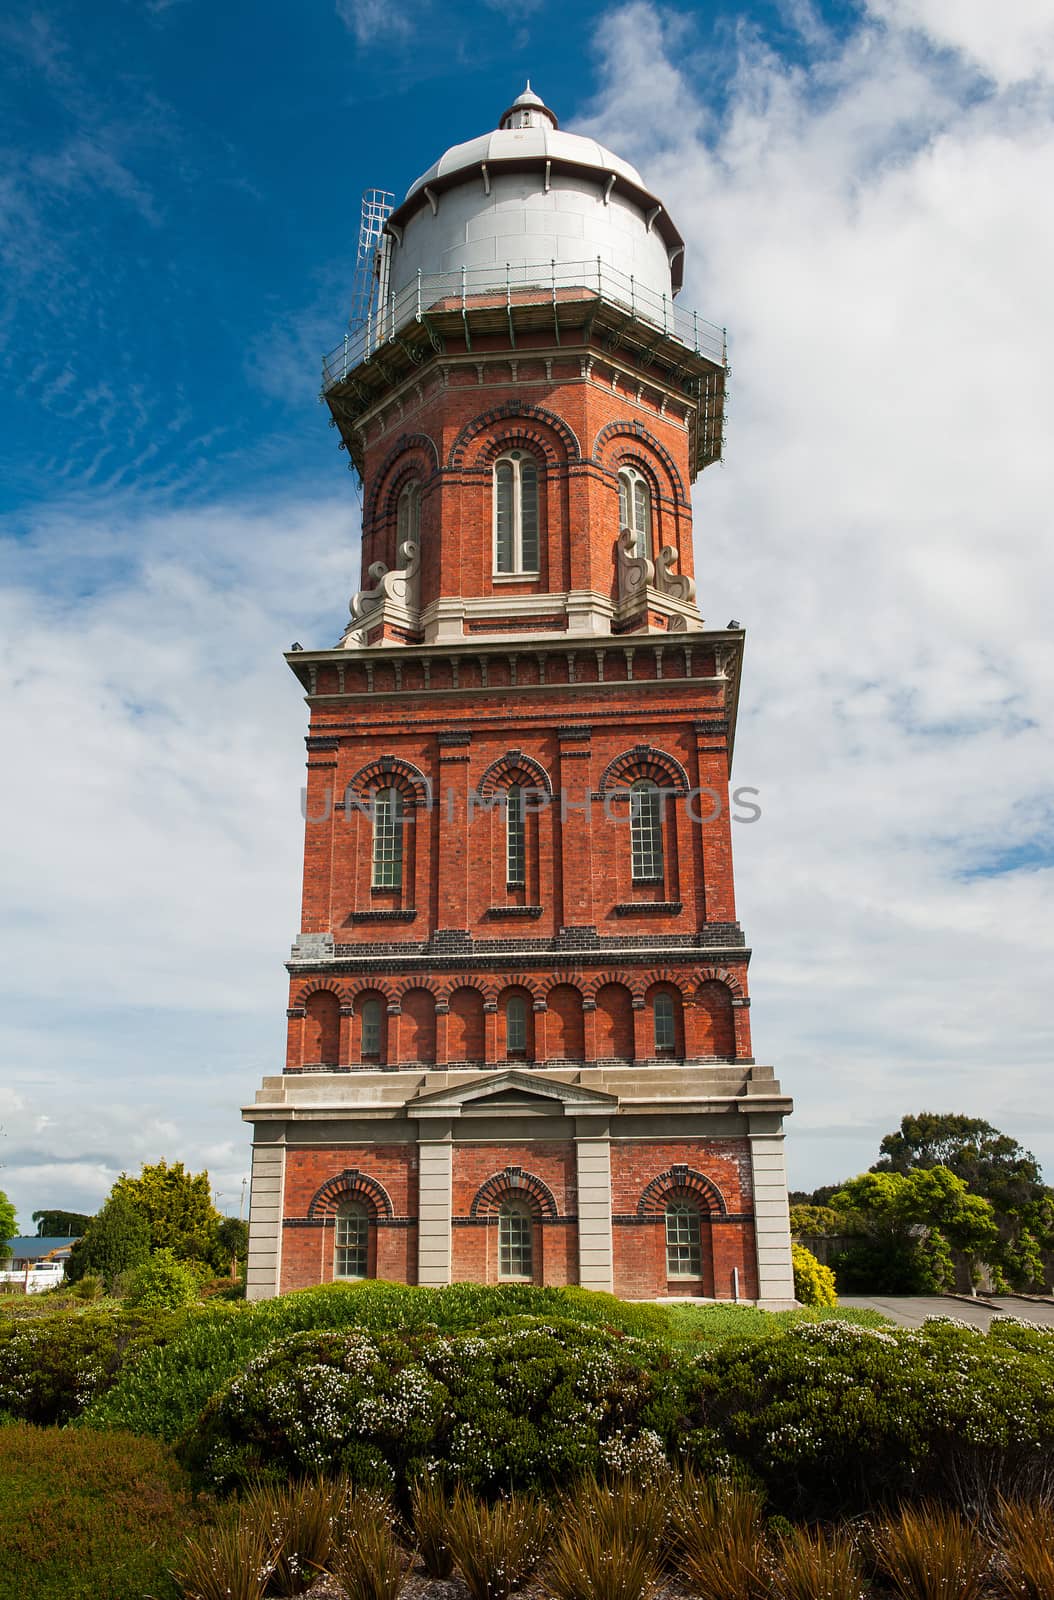 Invercargill Water Tower by fyletto